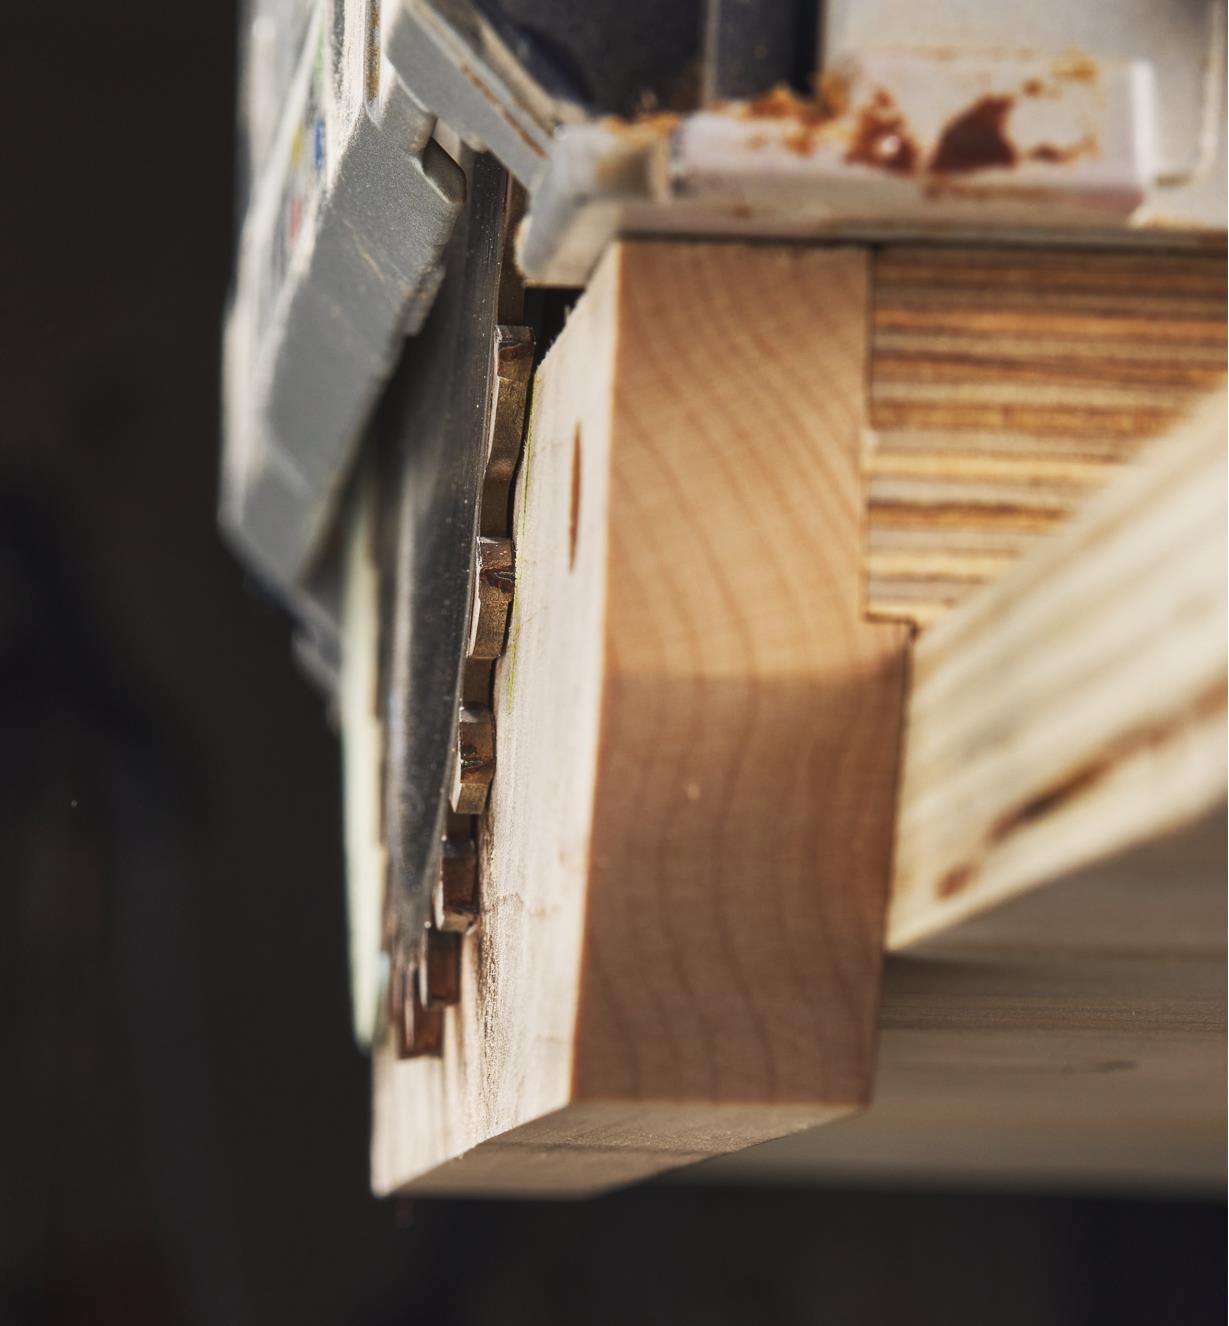 A close-up view showing an adjusted track saw blade set flush to the trimmed jig fence